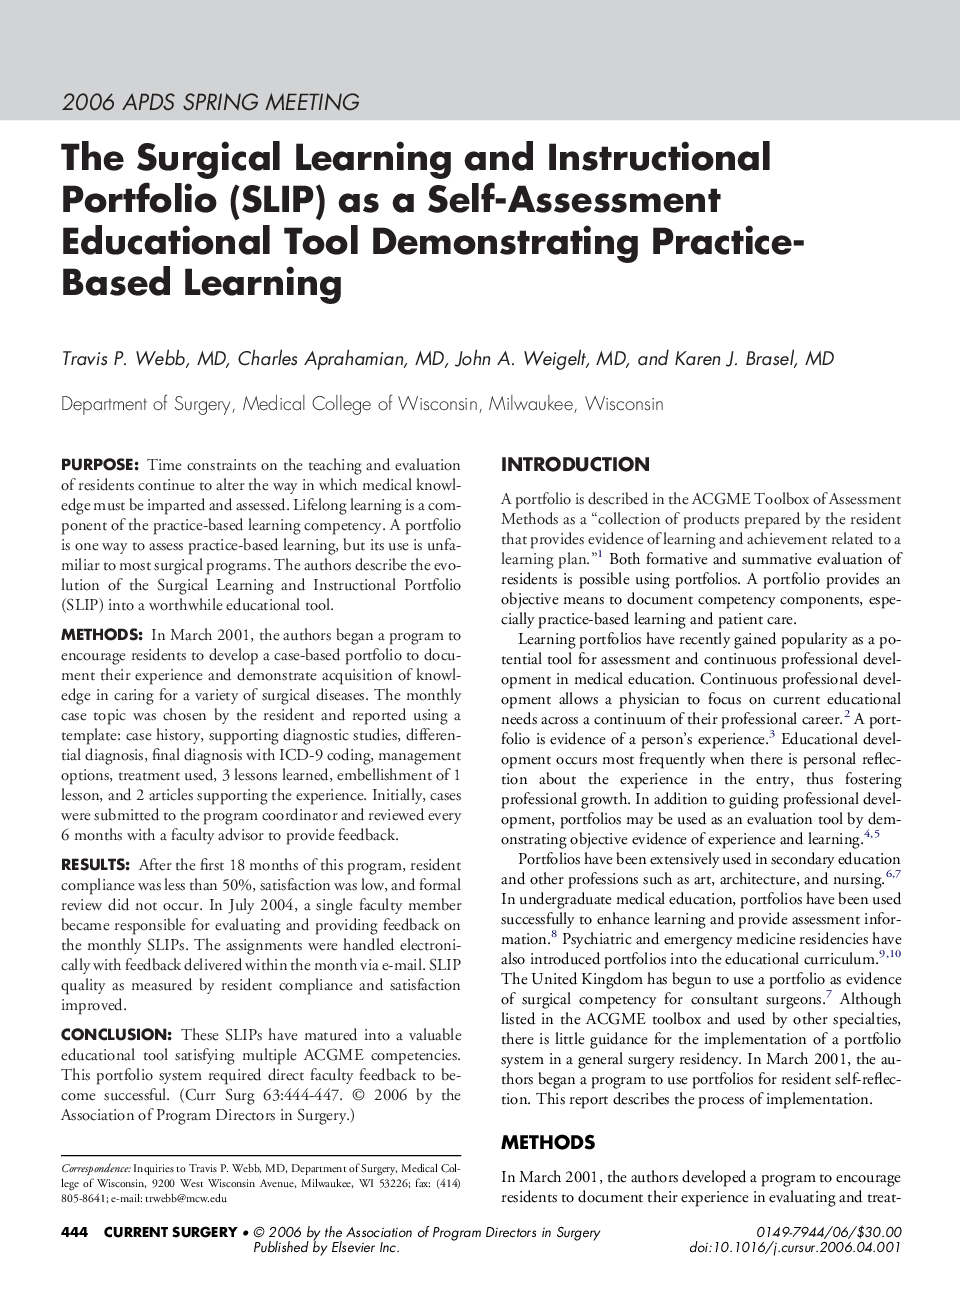 The Surgical Learning and Instructional Portfolio (SLIP) as a Self-Assessment Educational Tool Demonstrating Practice-Based Learning